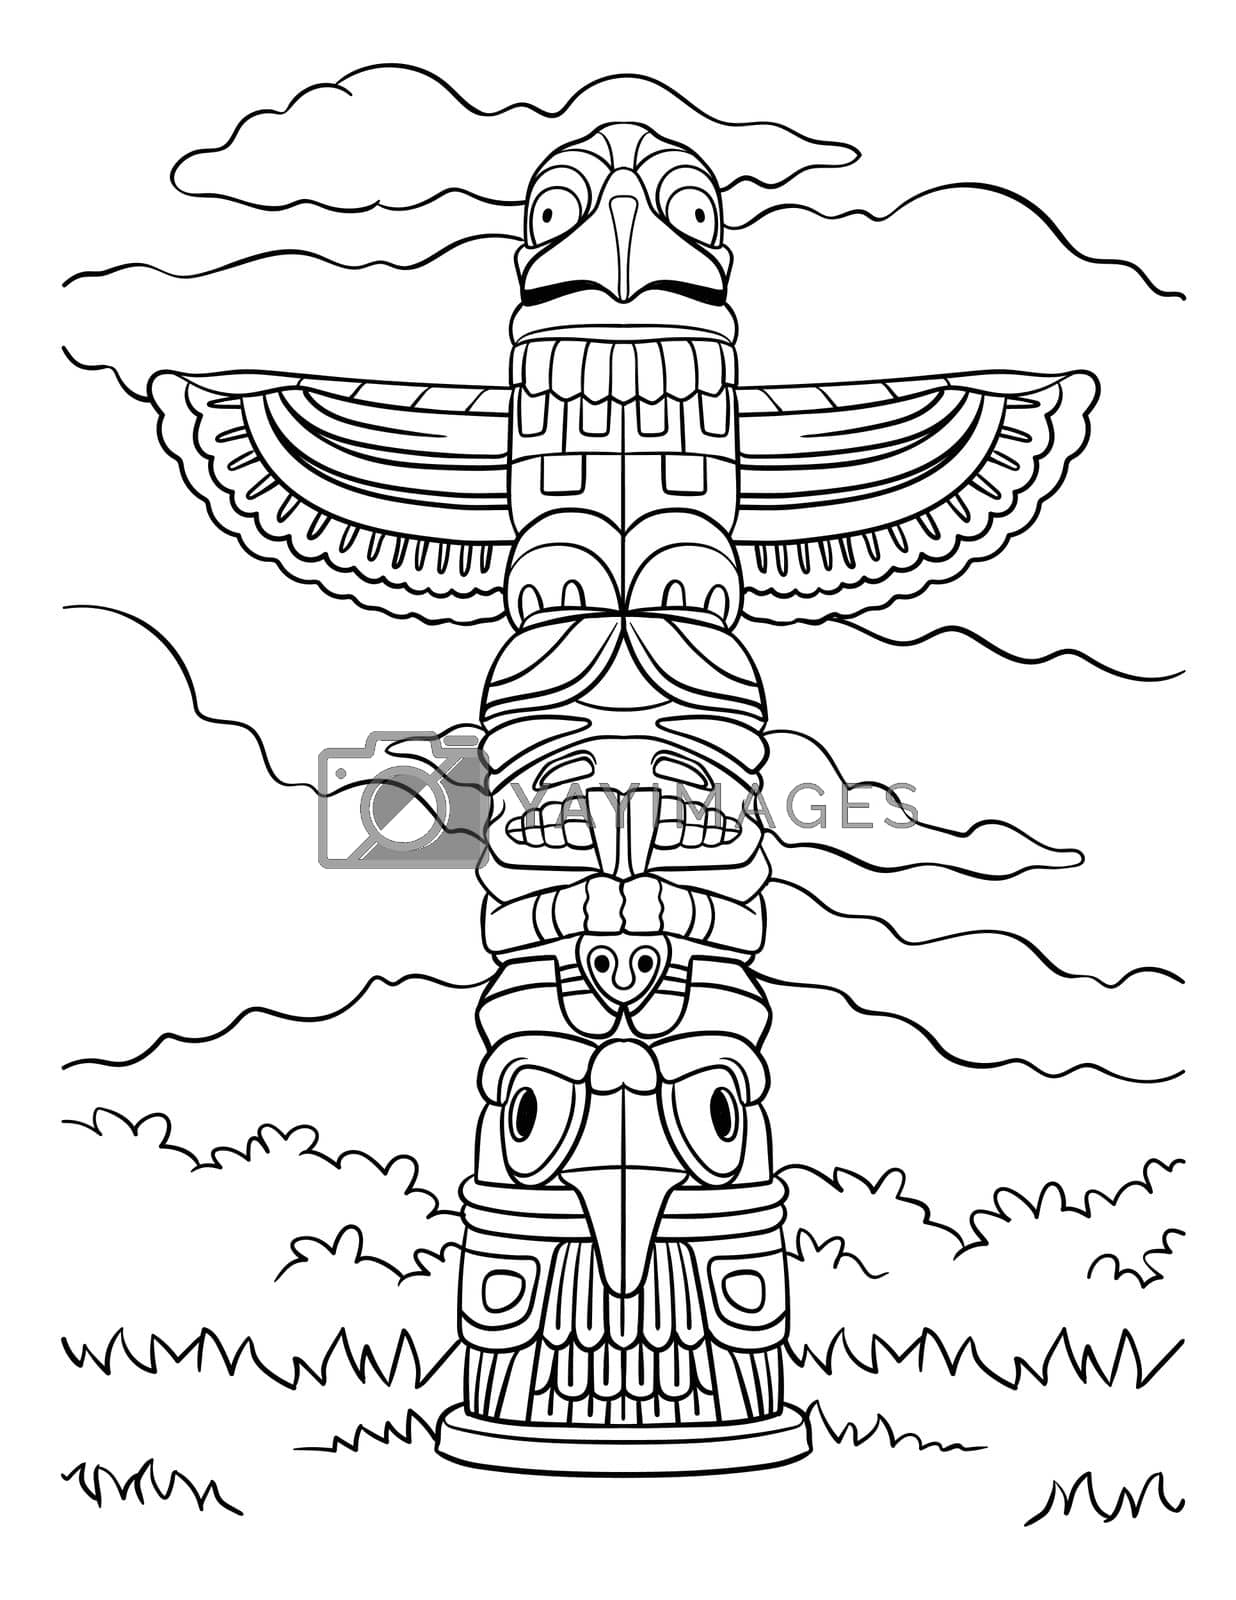 Royalty free image of Native American Indian Totem Coloring Page by abbydesign